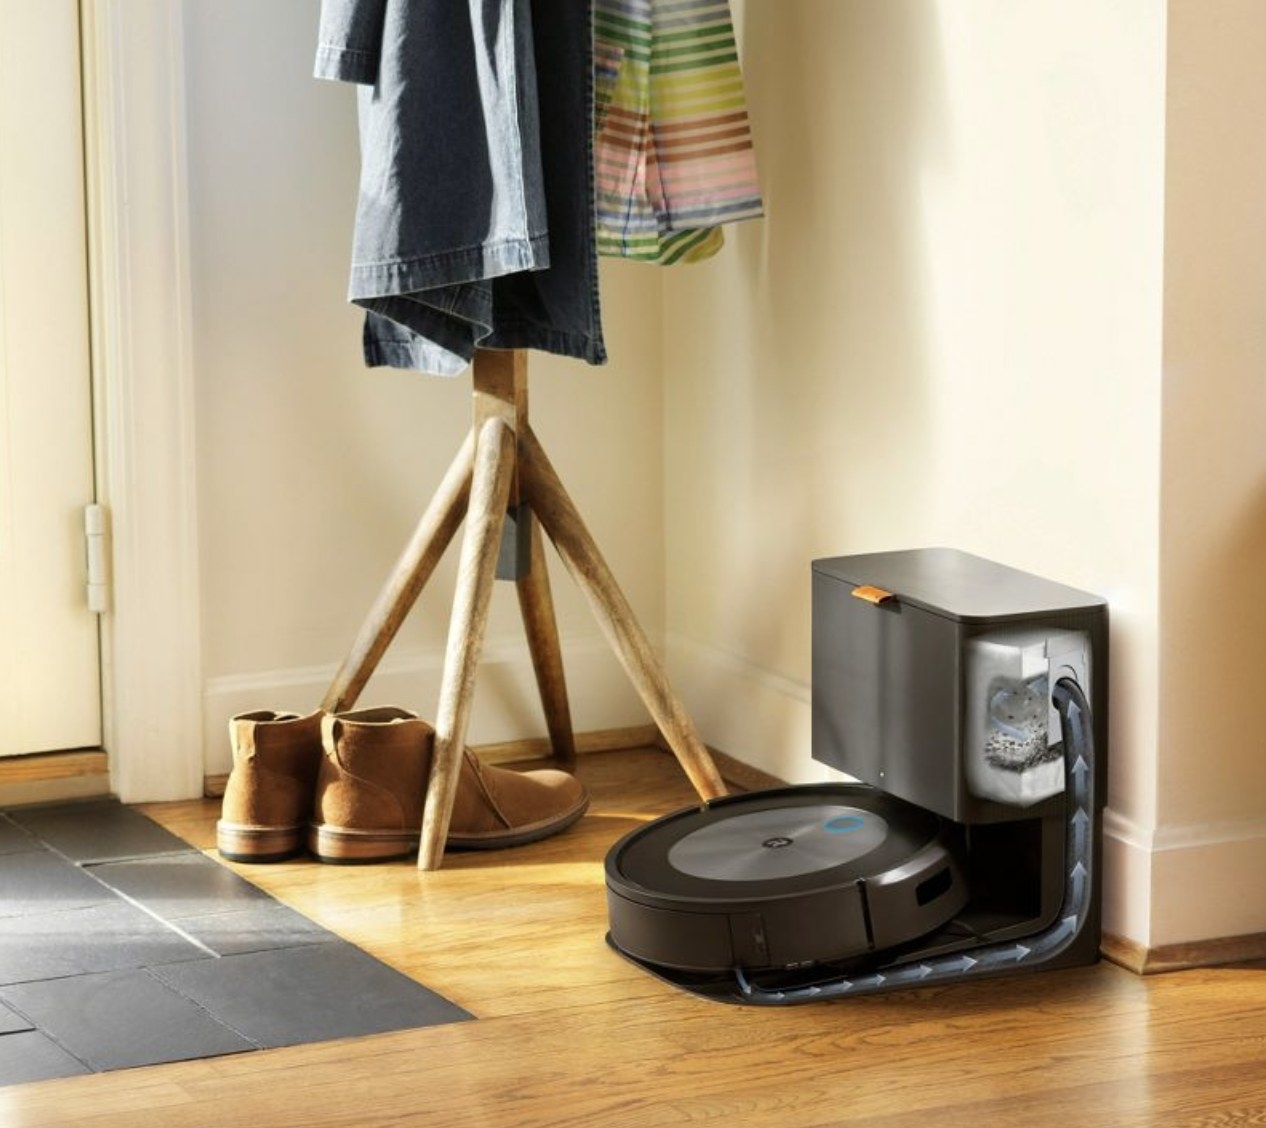 A robotic vacuum with a disposal dock